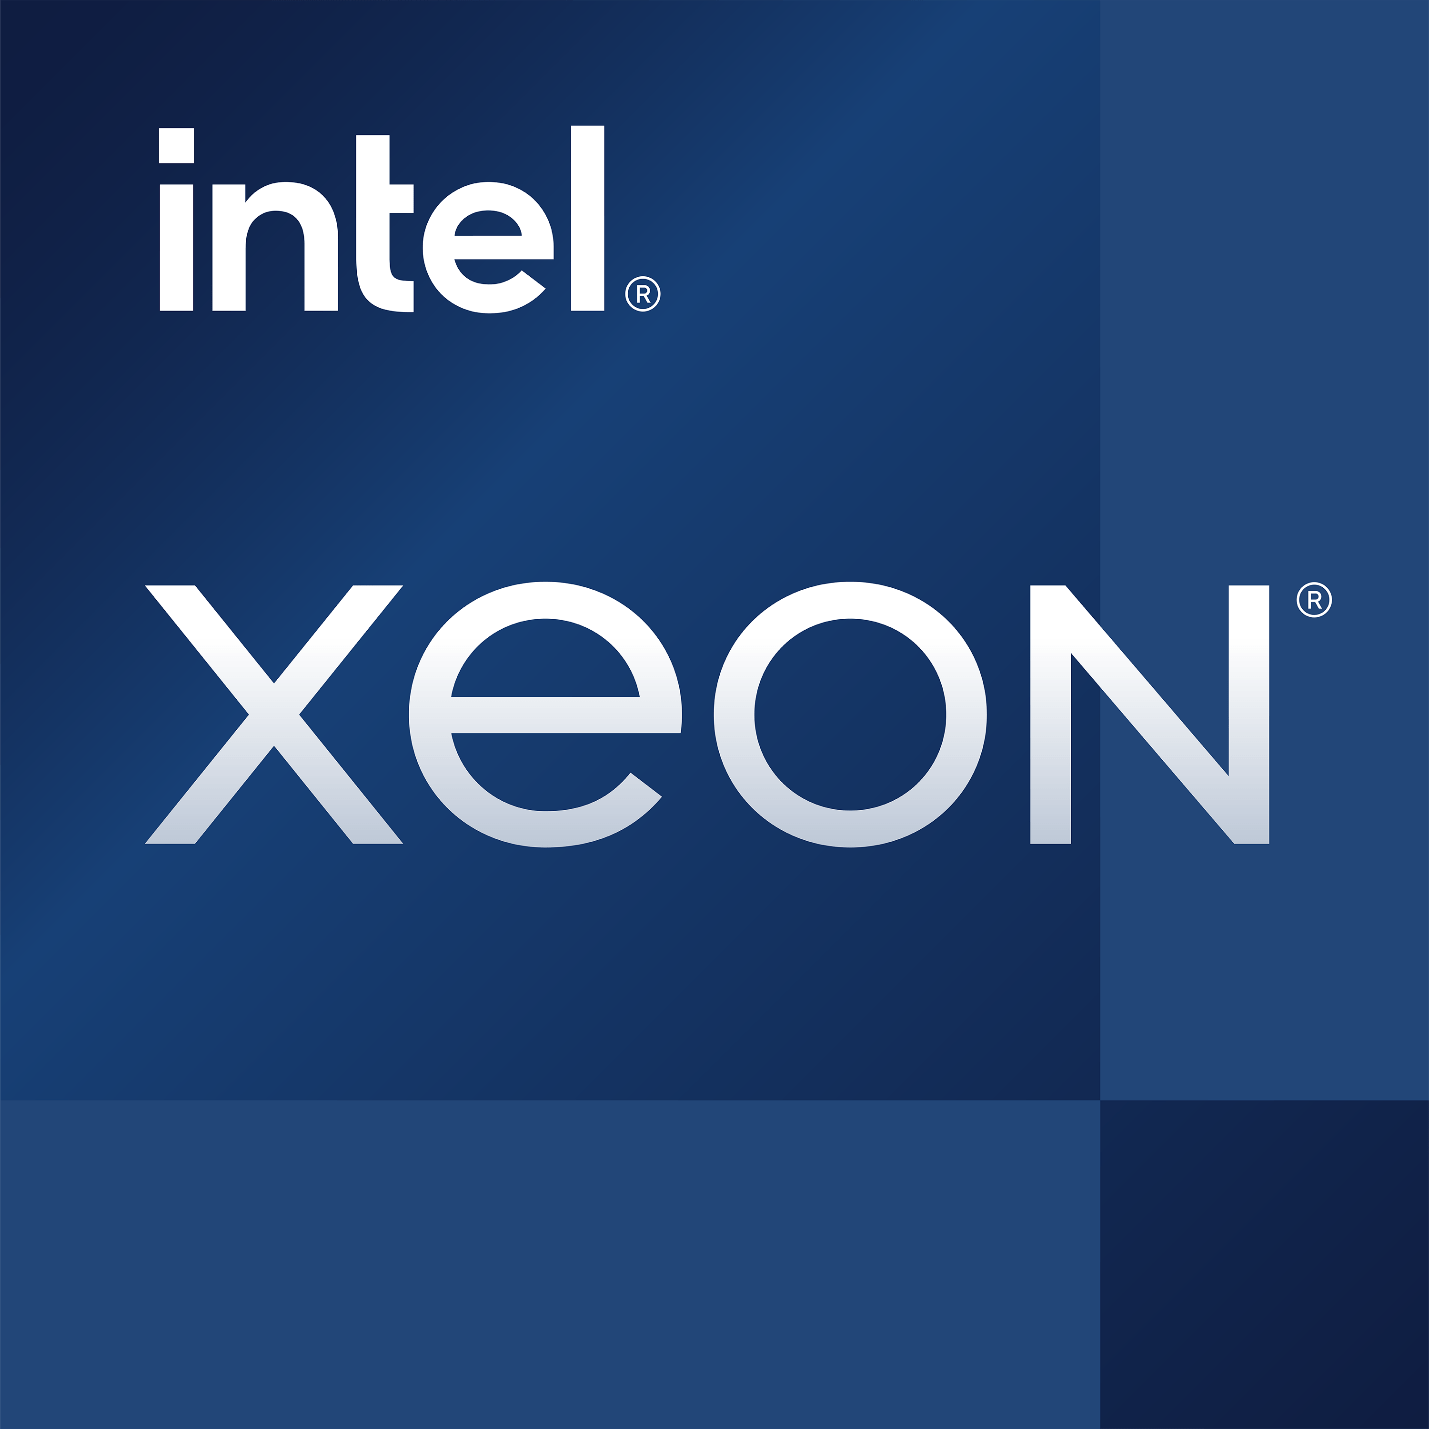 Based on the fourth generation Intel ® xeon ® Design of Wave Cloud Sea Hyperfusion Compression and Erasure Correction Functions for Scalable Processors